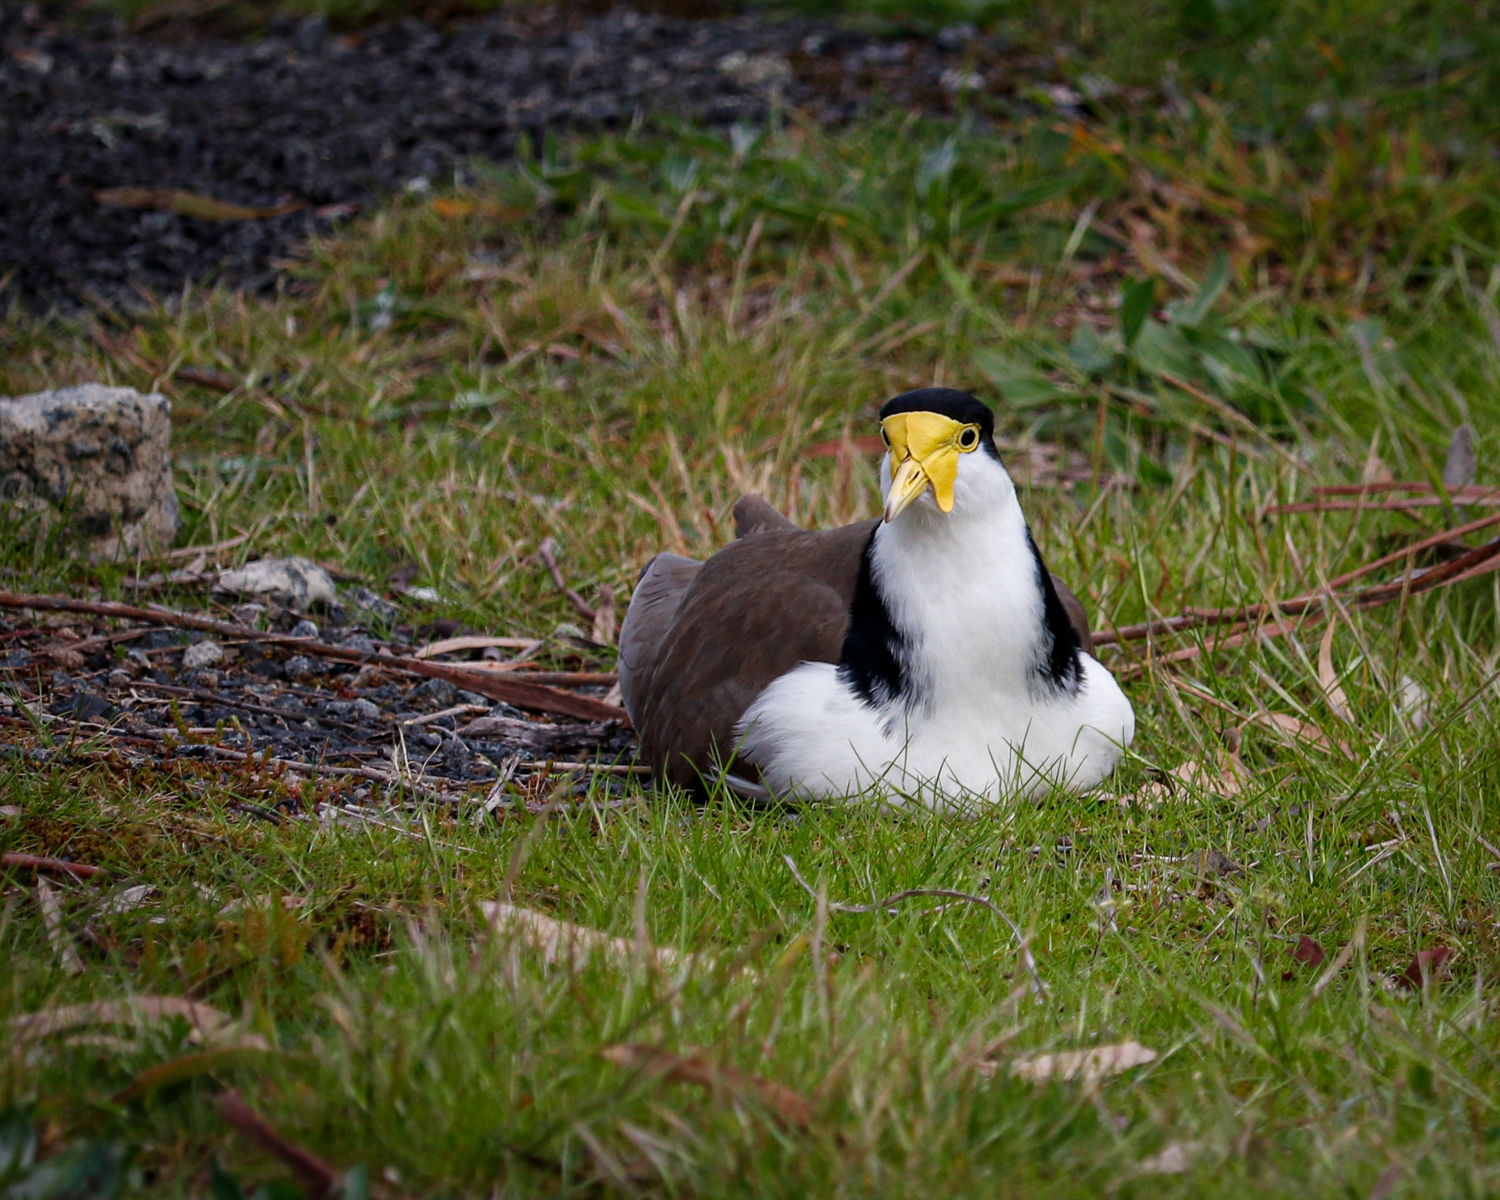 A plover (masked lapwing) sitting on the ground in some grass